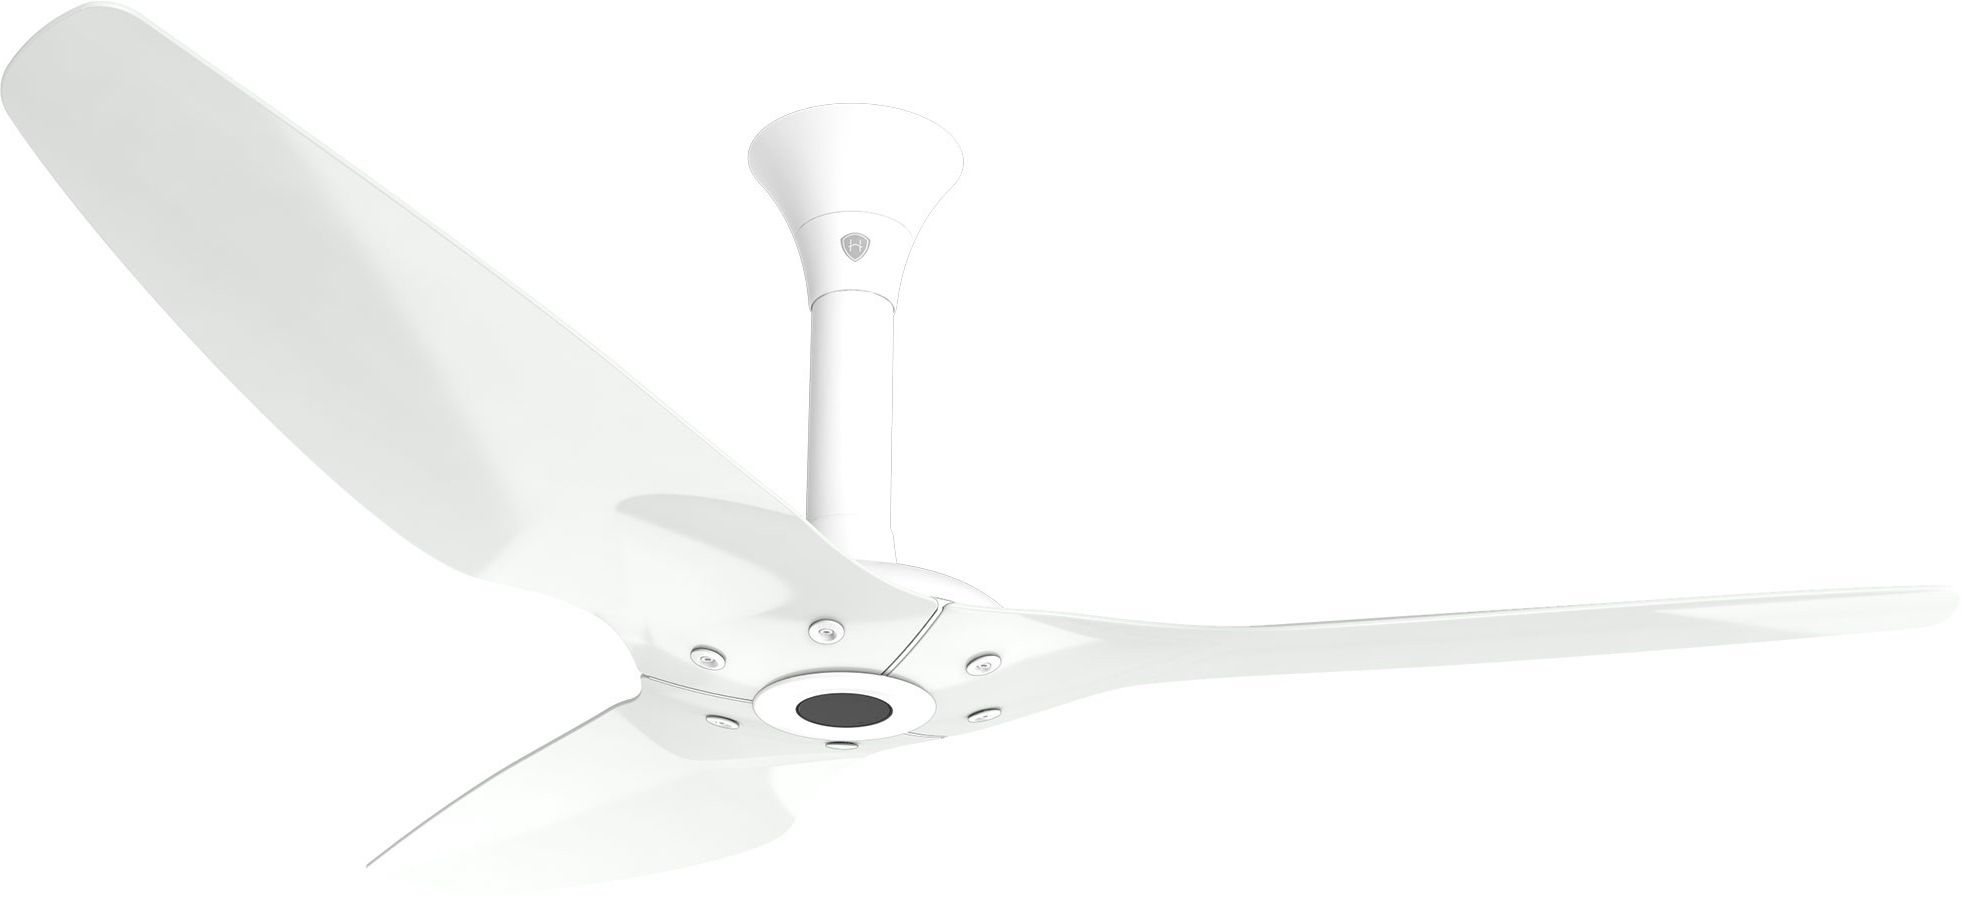 Outdoor Ceiling Fans With Aluminum Blades Regarding Fashionable Haiku Outdoor Ceiling Fan: 60", White Aluminum, Standard Mount (View 11 of 20)